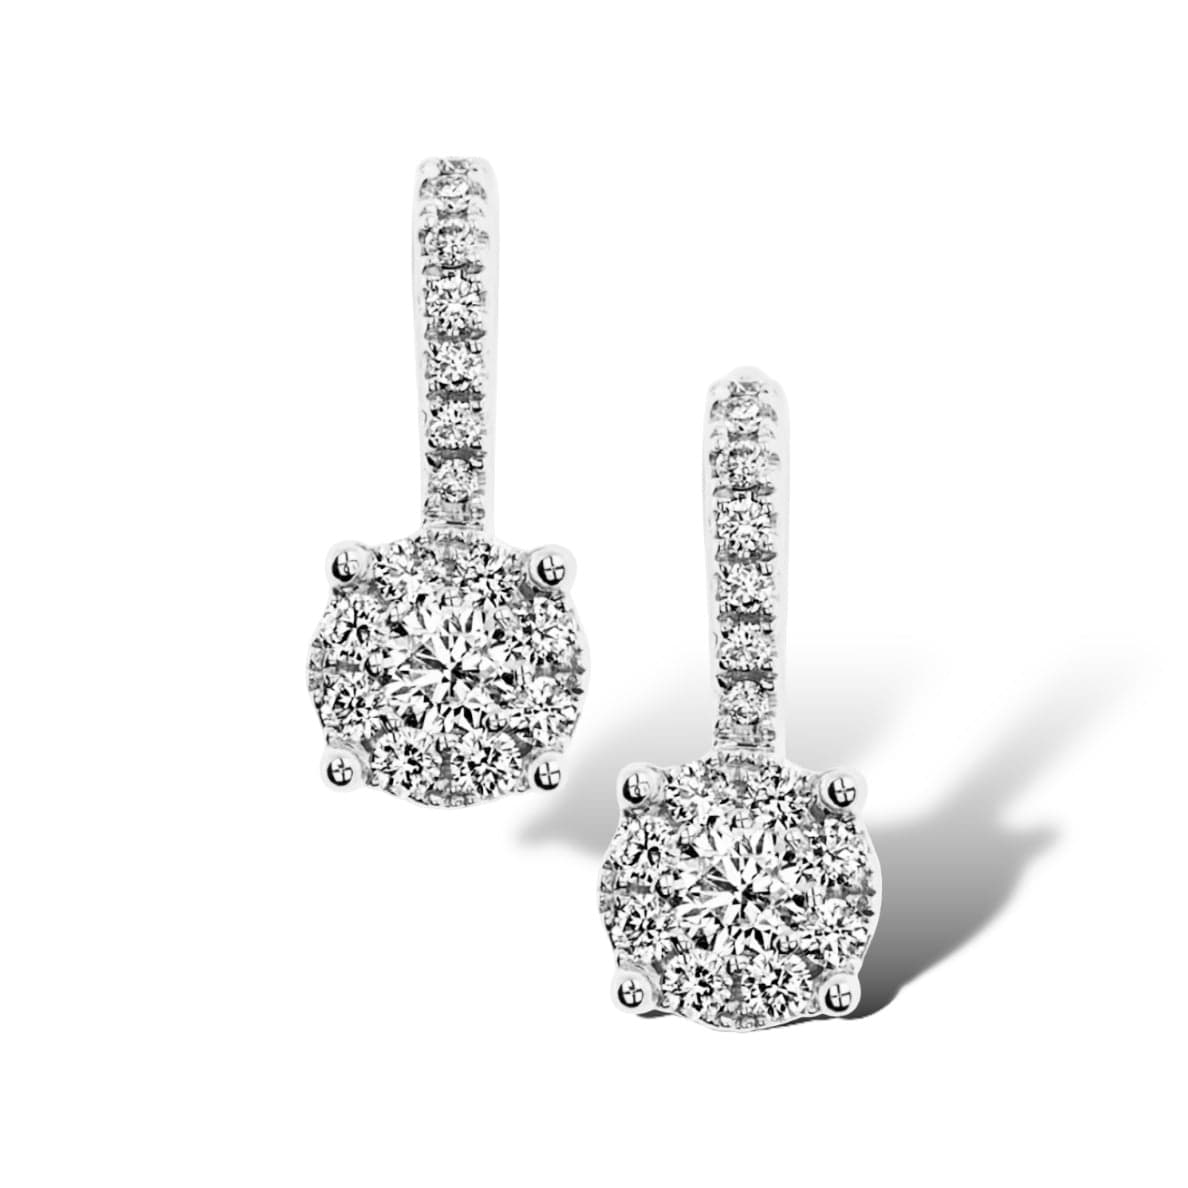 INVISIBLE HANGING DIAMOND EARRINGS